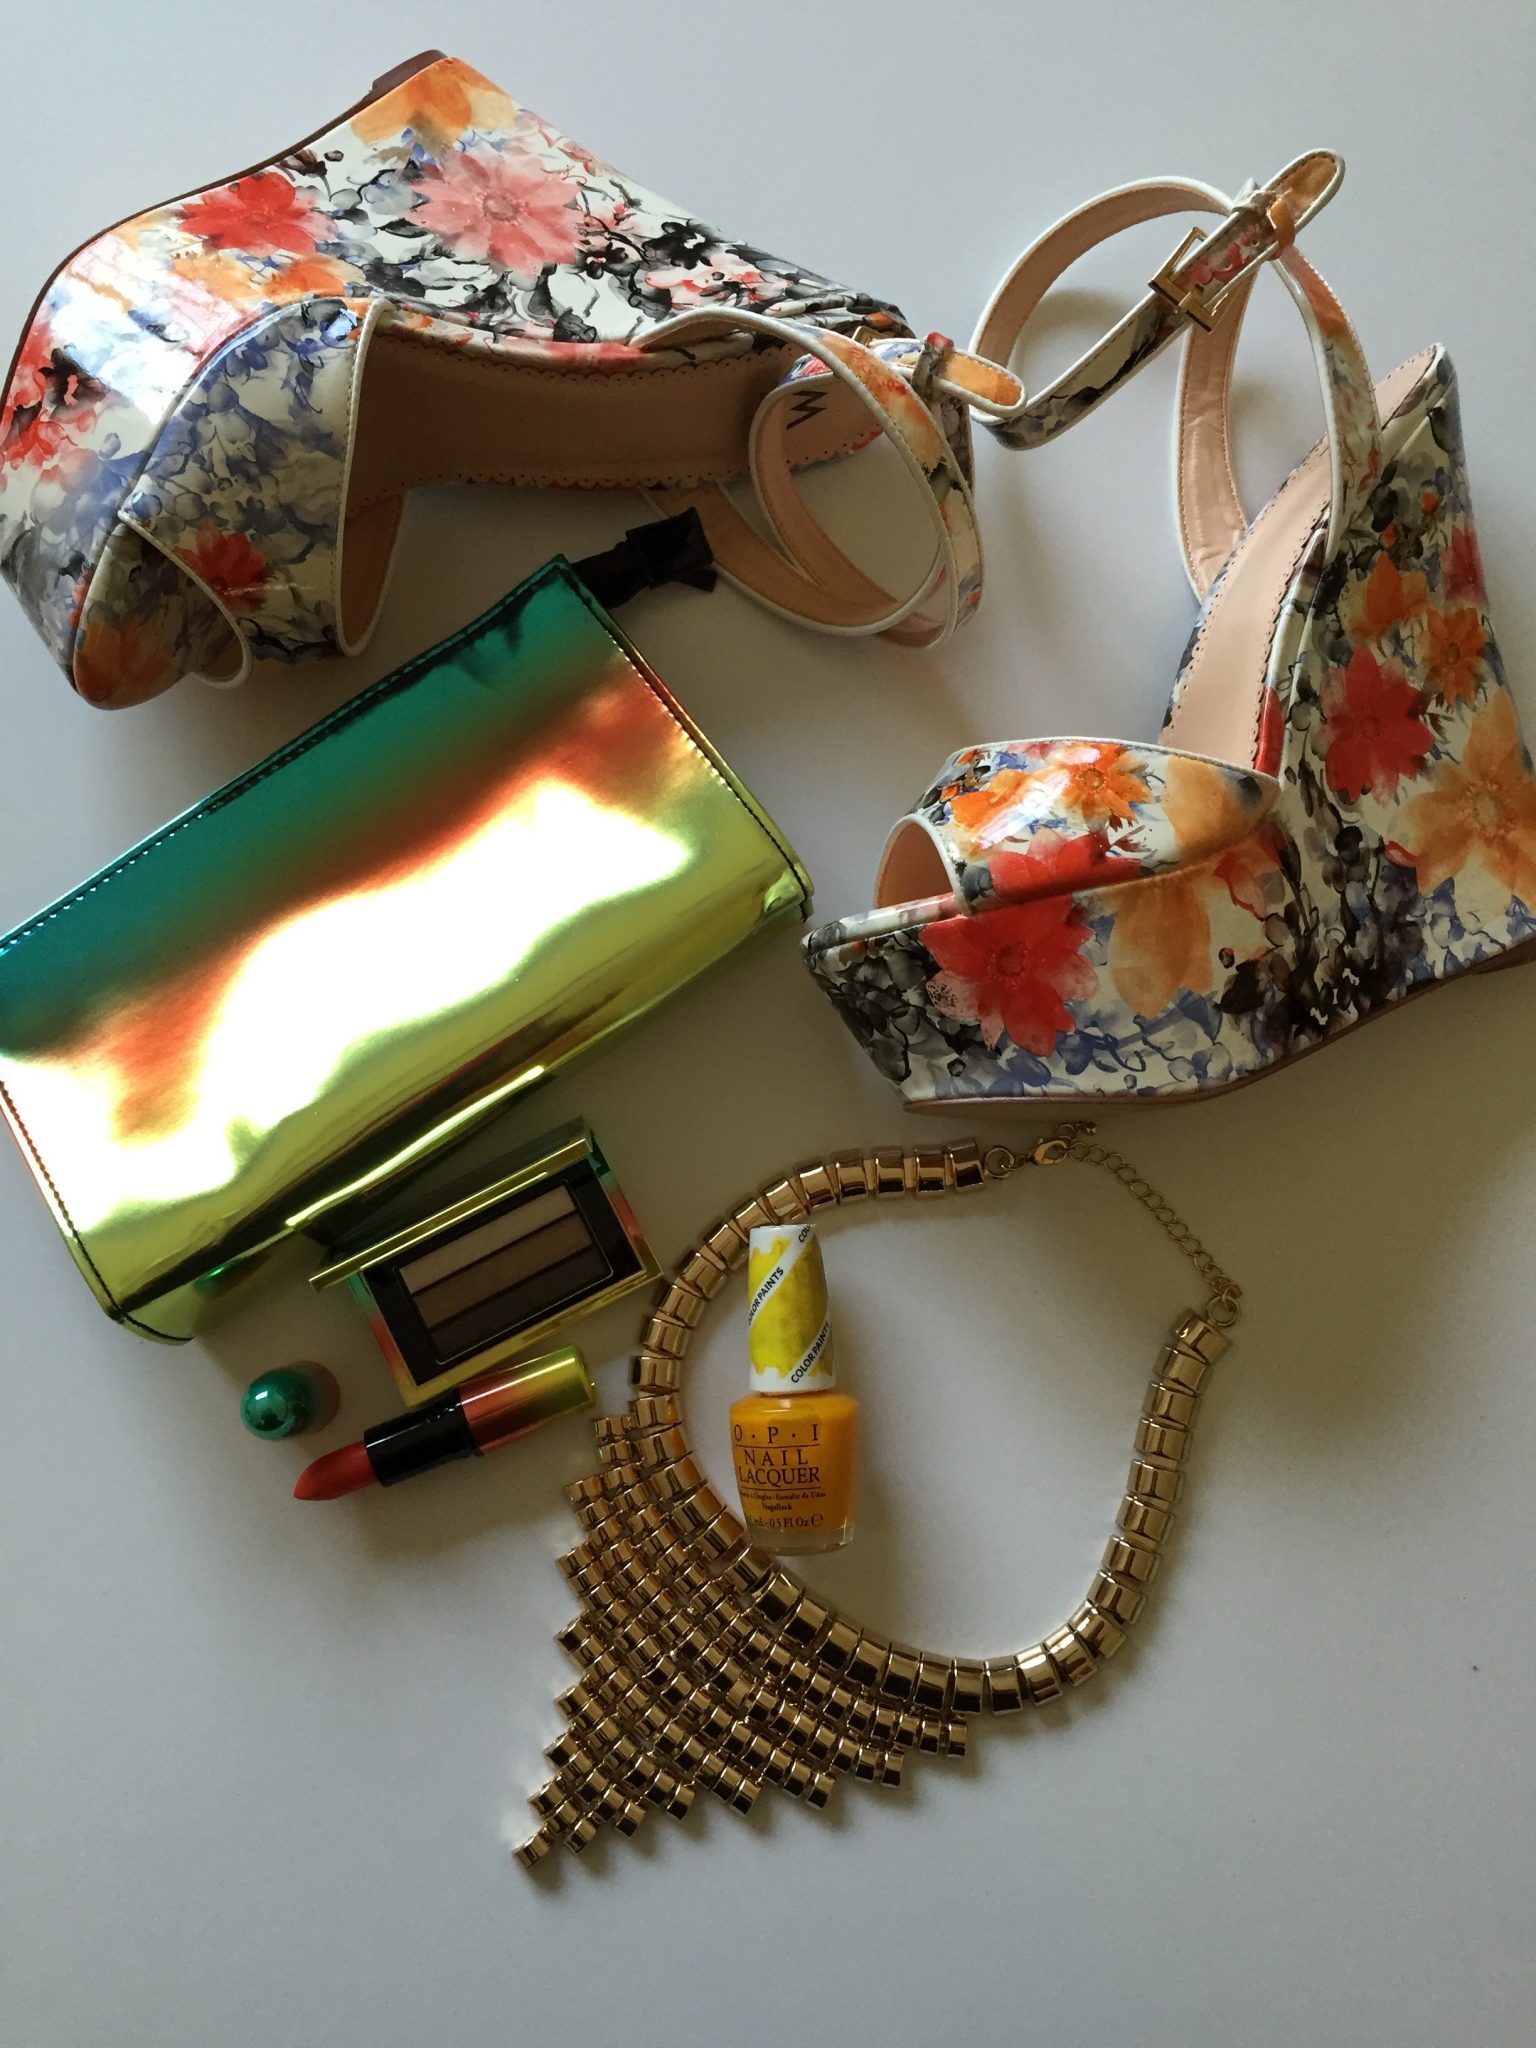 Beauty & Fashion Items I’m Currently Obsessed With